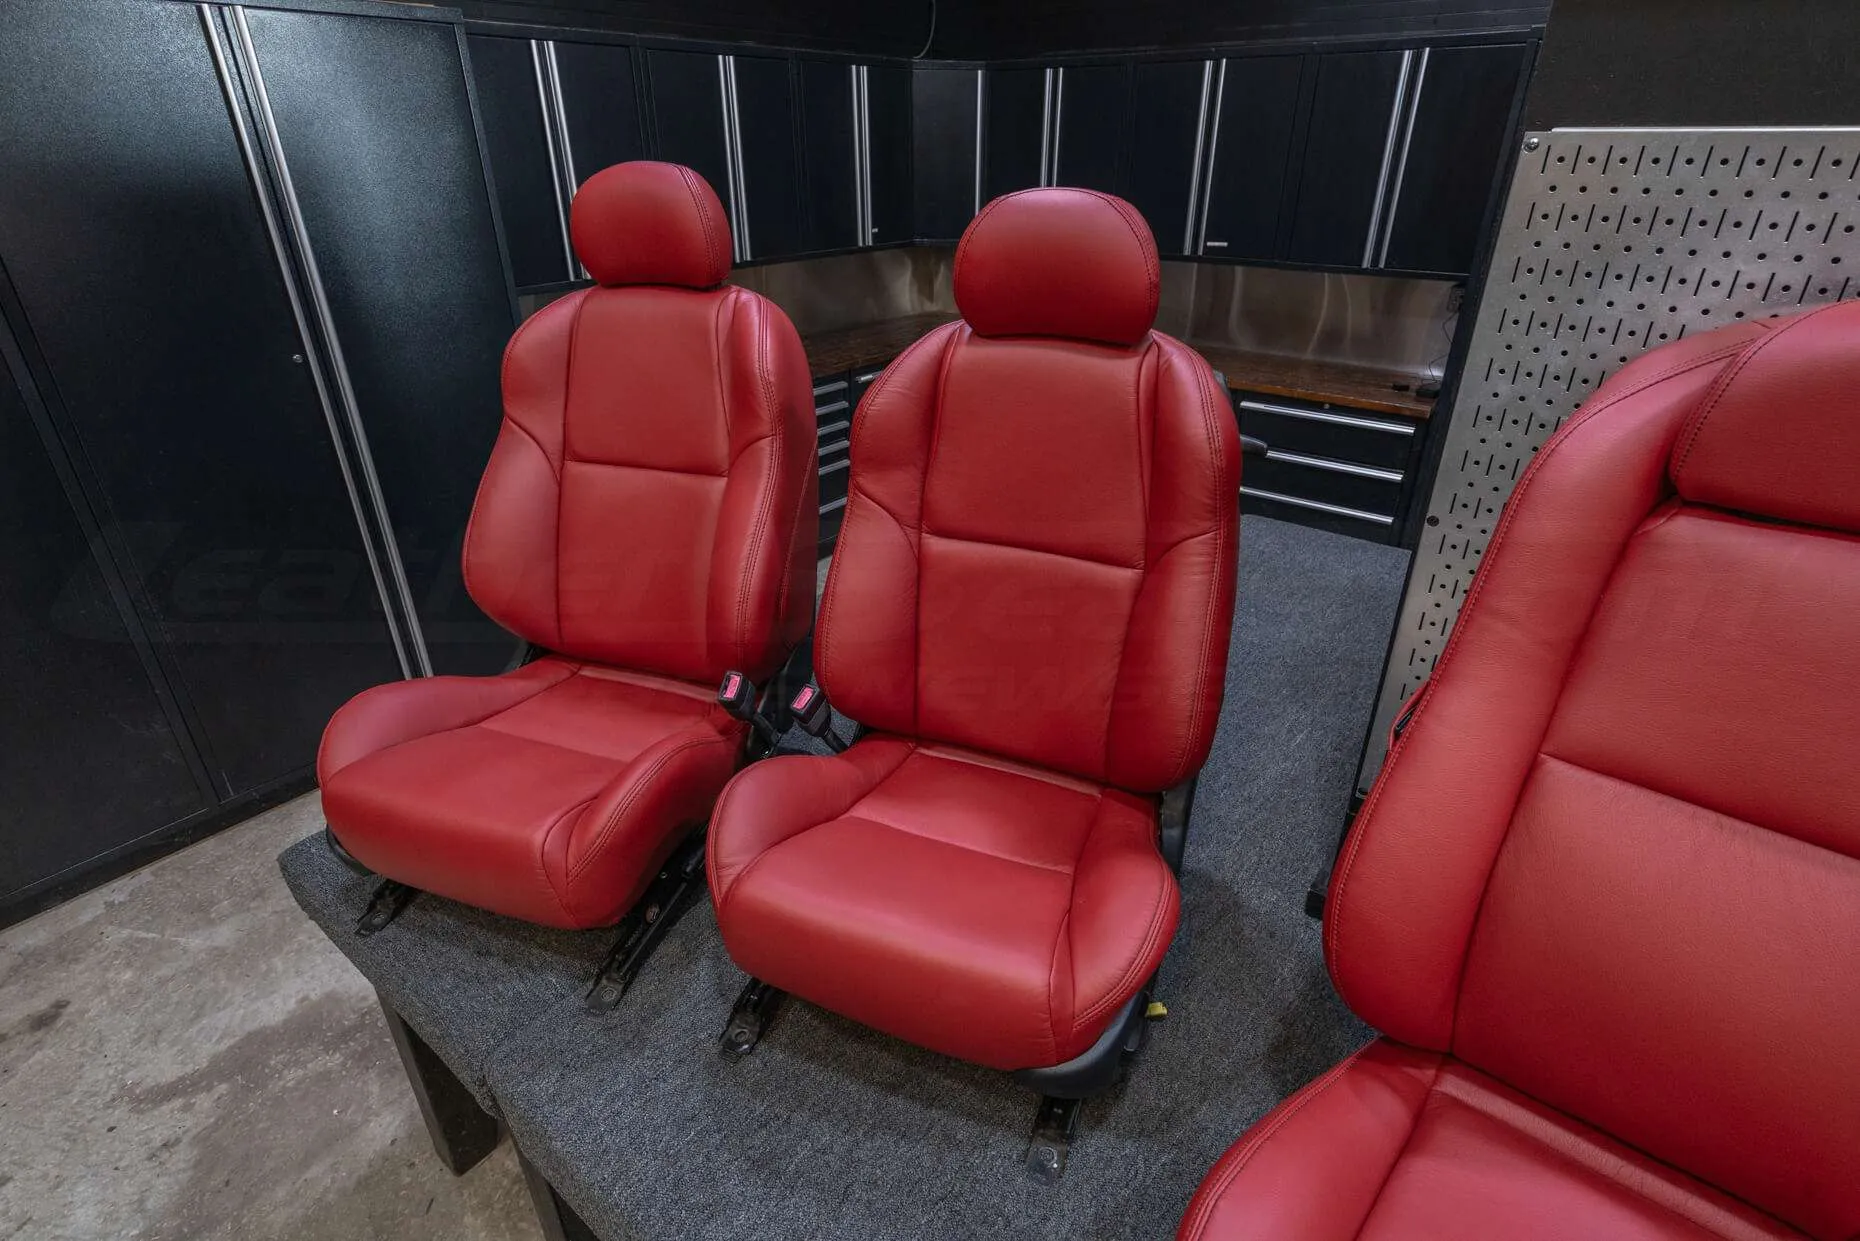 INstalled Cardinal Pontiac G8 Leather Seats - Front seats